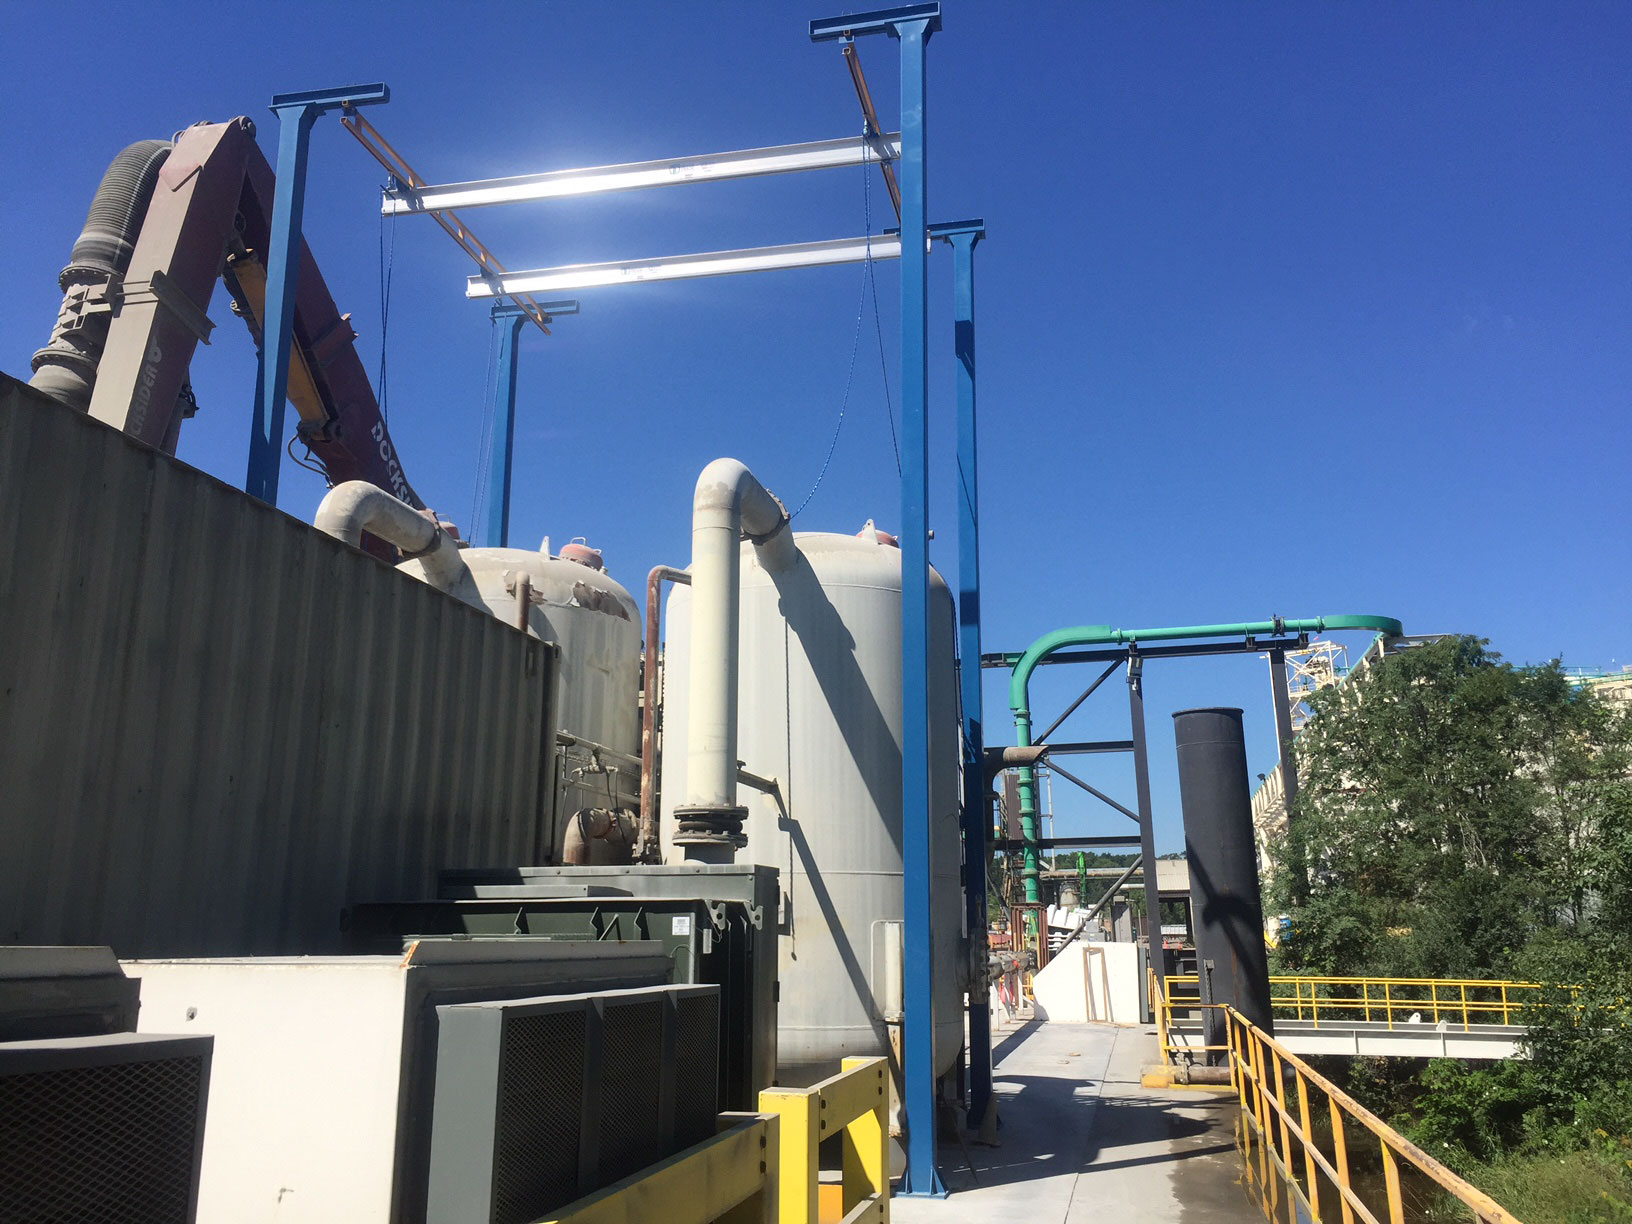  The fall protection system installed by Yale features a rail and trolley system that allows workers to maintain an overhead tie off while they safely and efficiently access multiple elevated work areas. 